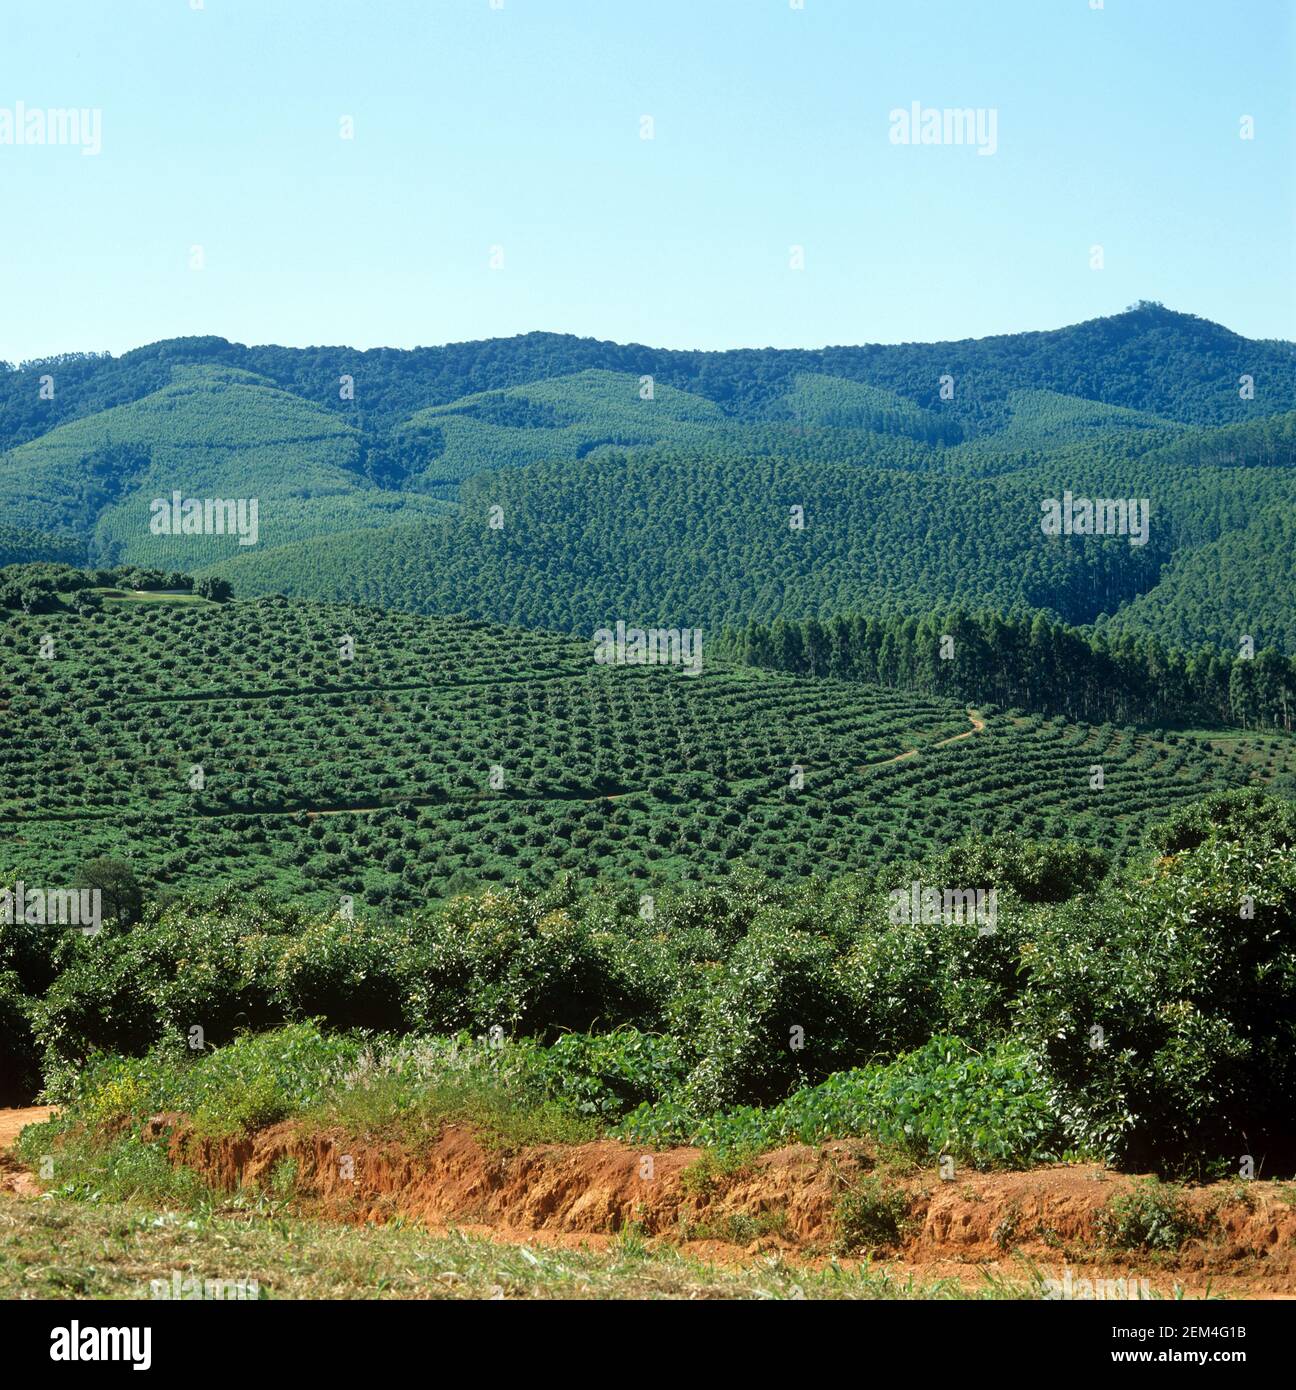 Lines of avocado trees in the foreground with a forestry plantion of Eucalyptus trees over the hills behind, Transvaal, South Africa, February Stock Photo